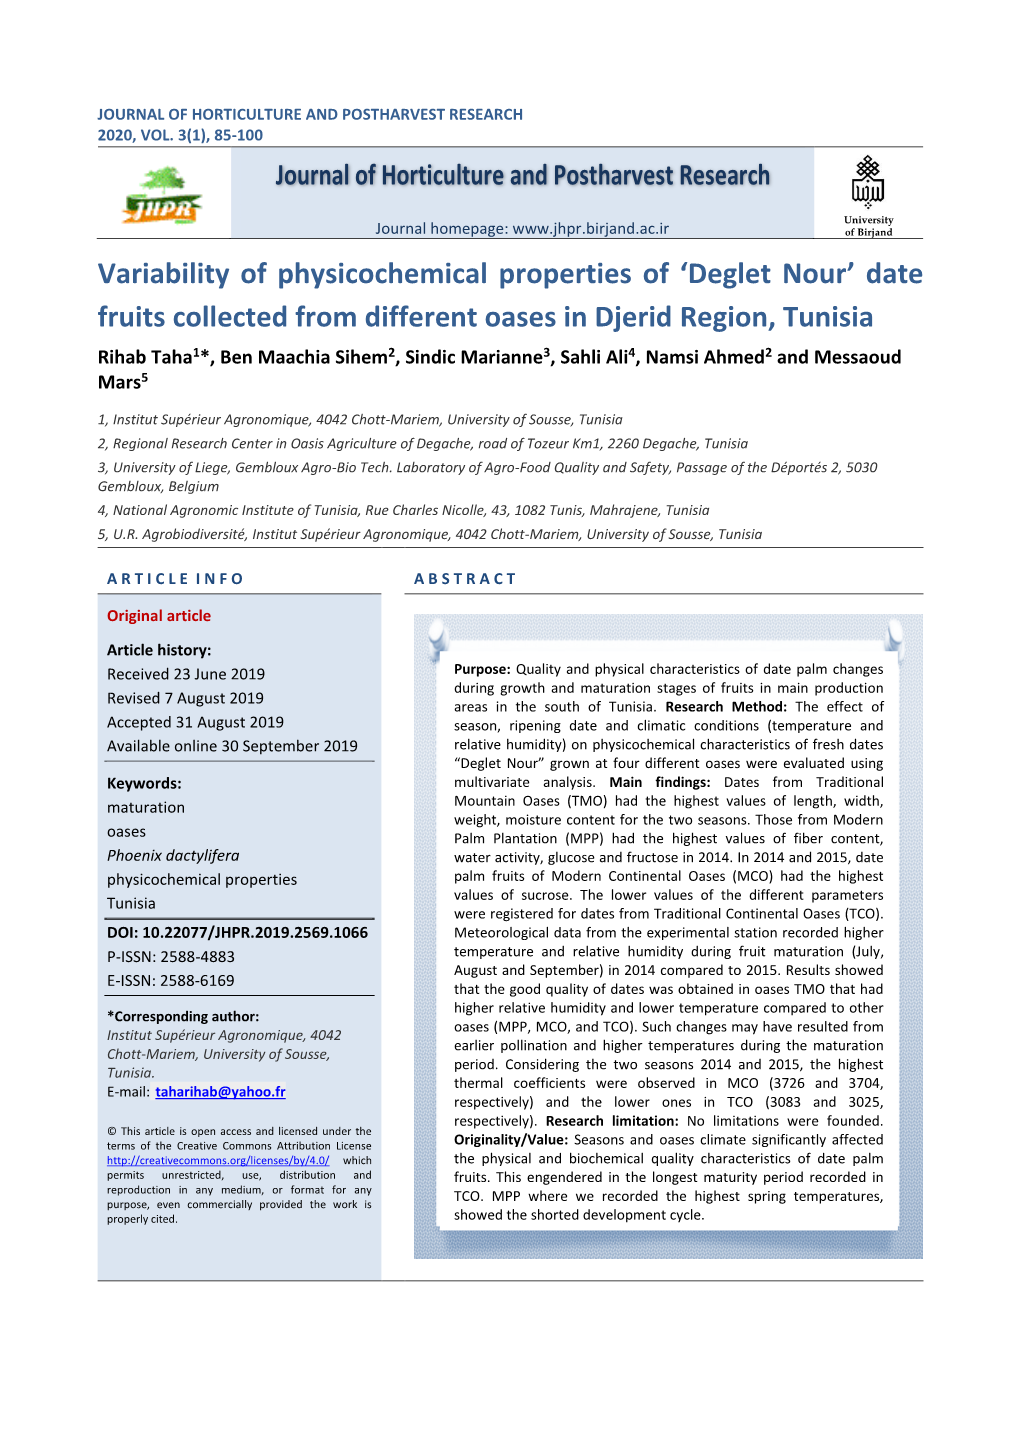 Variability of Physicochemical Properties of 'Deglet Nour' Date Fruits Collected from Different Oases in Djerid Region, Tuni